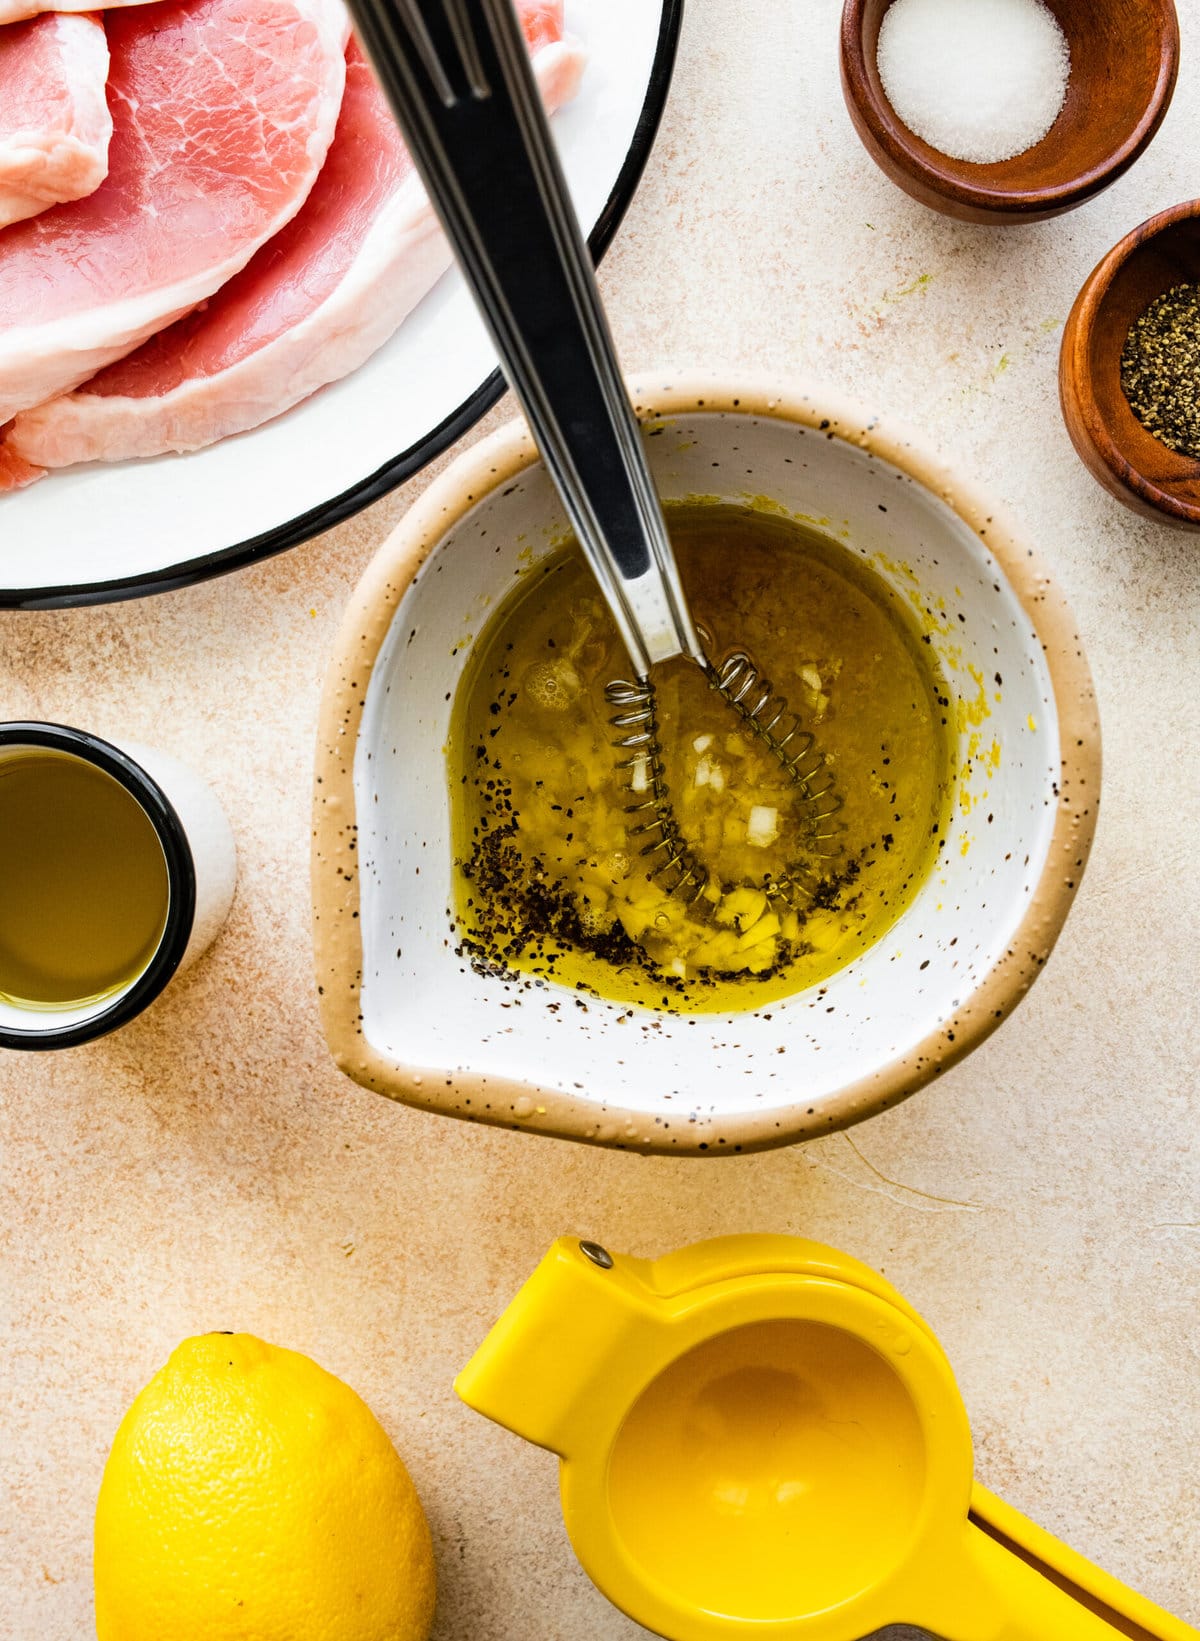 How to Make Best Juicy Thin Pork Chops Step by Step: mixing marinade ingredients in a bowl.